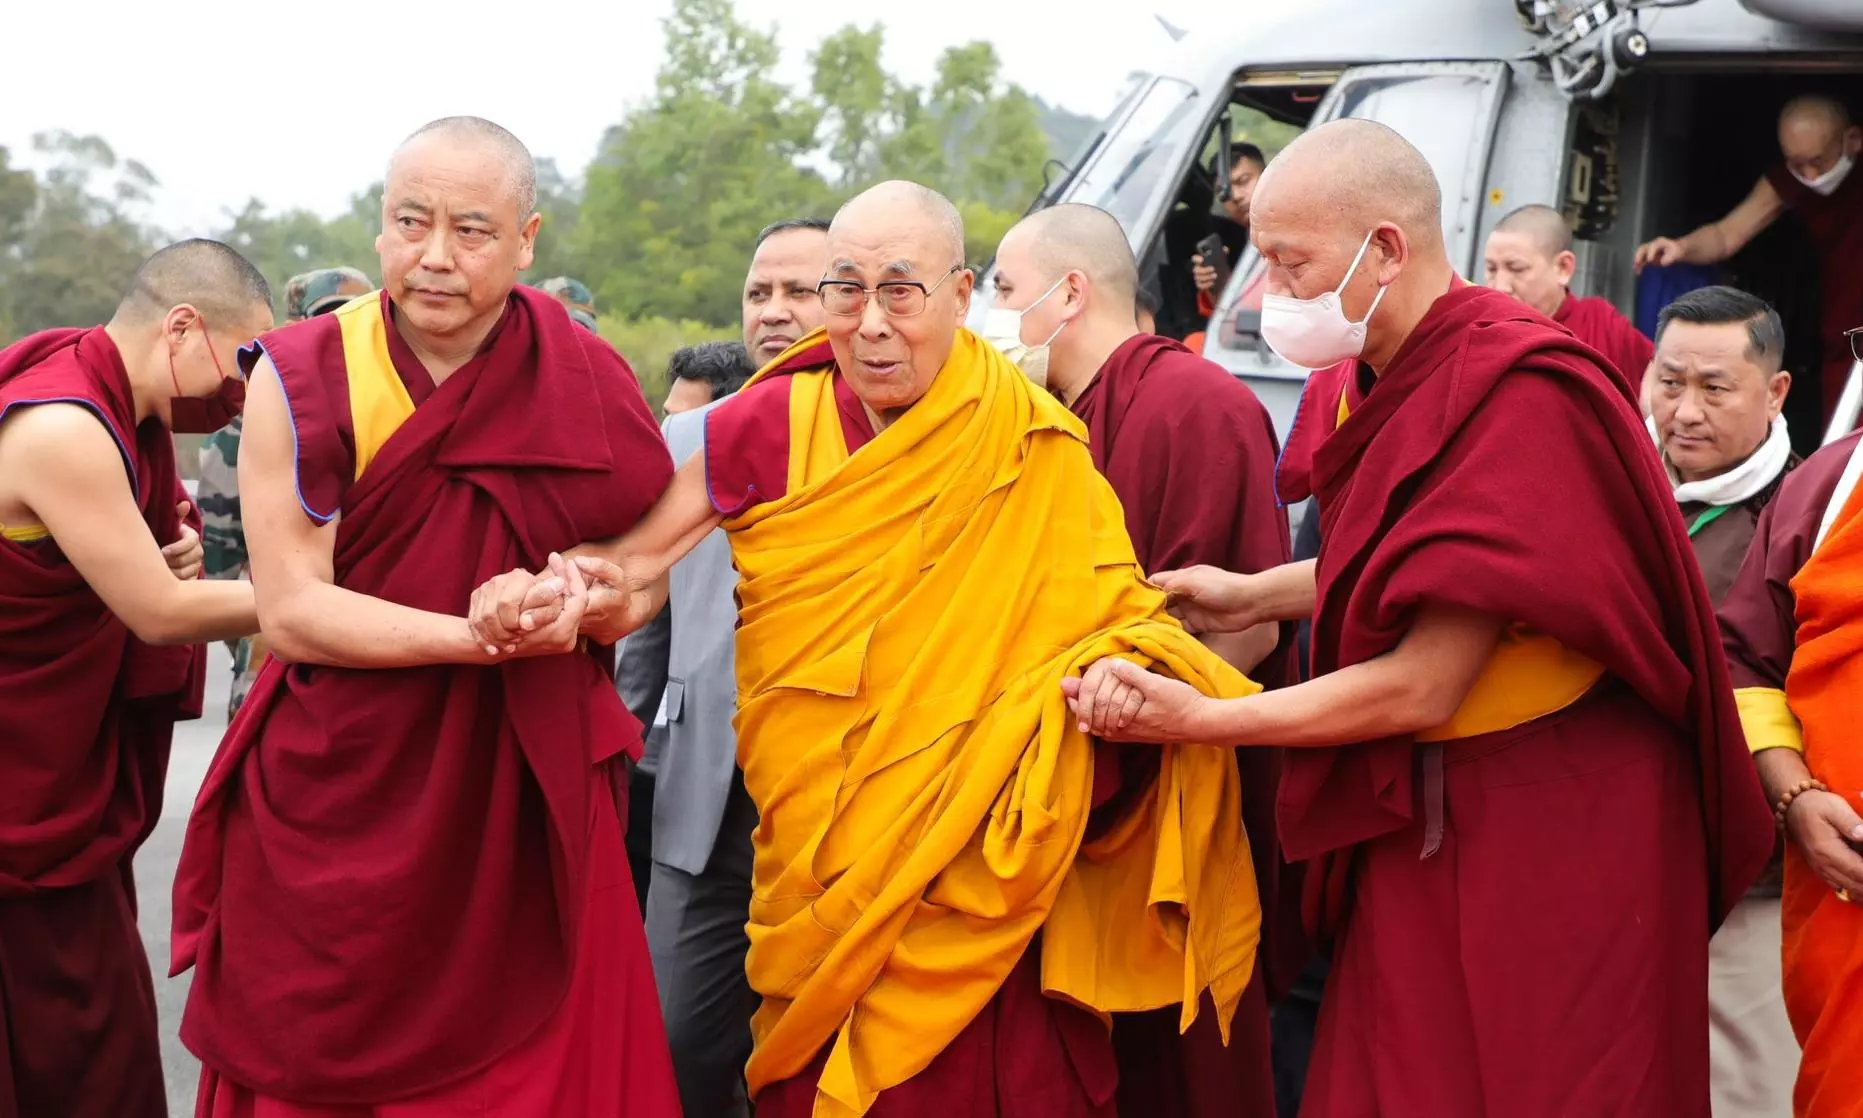 Dalai Lama on 4-day visit to Sikkim, imparts teachings to devotees